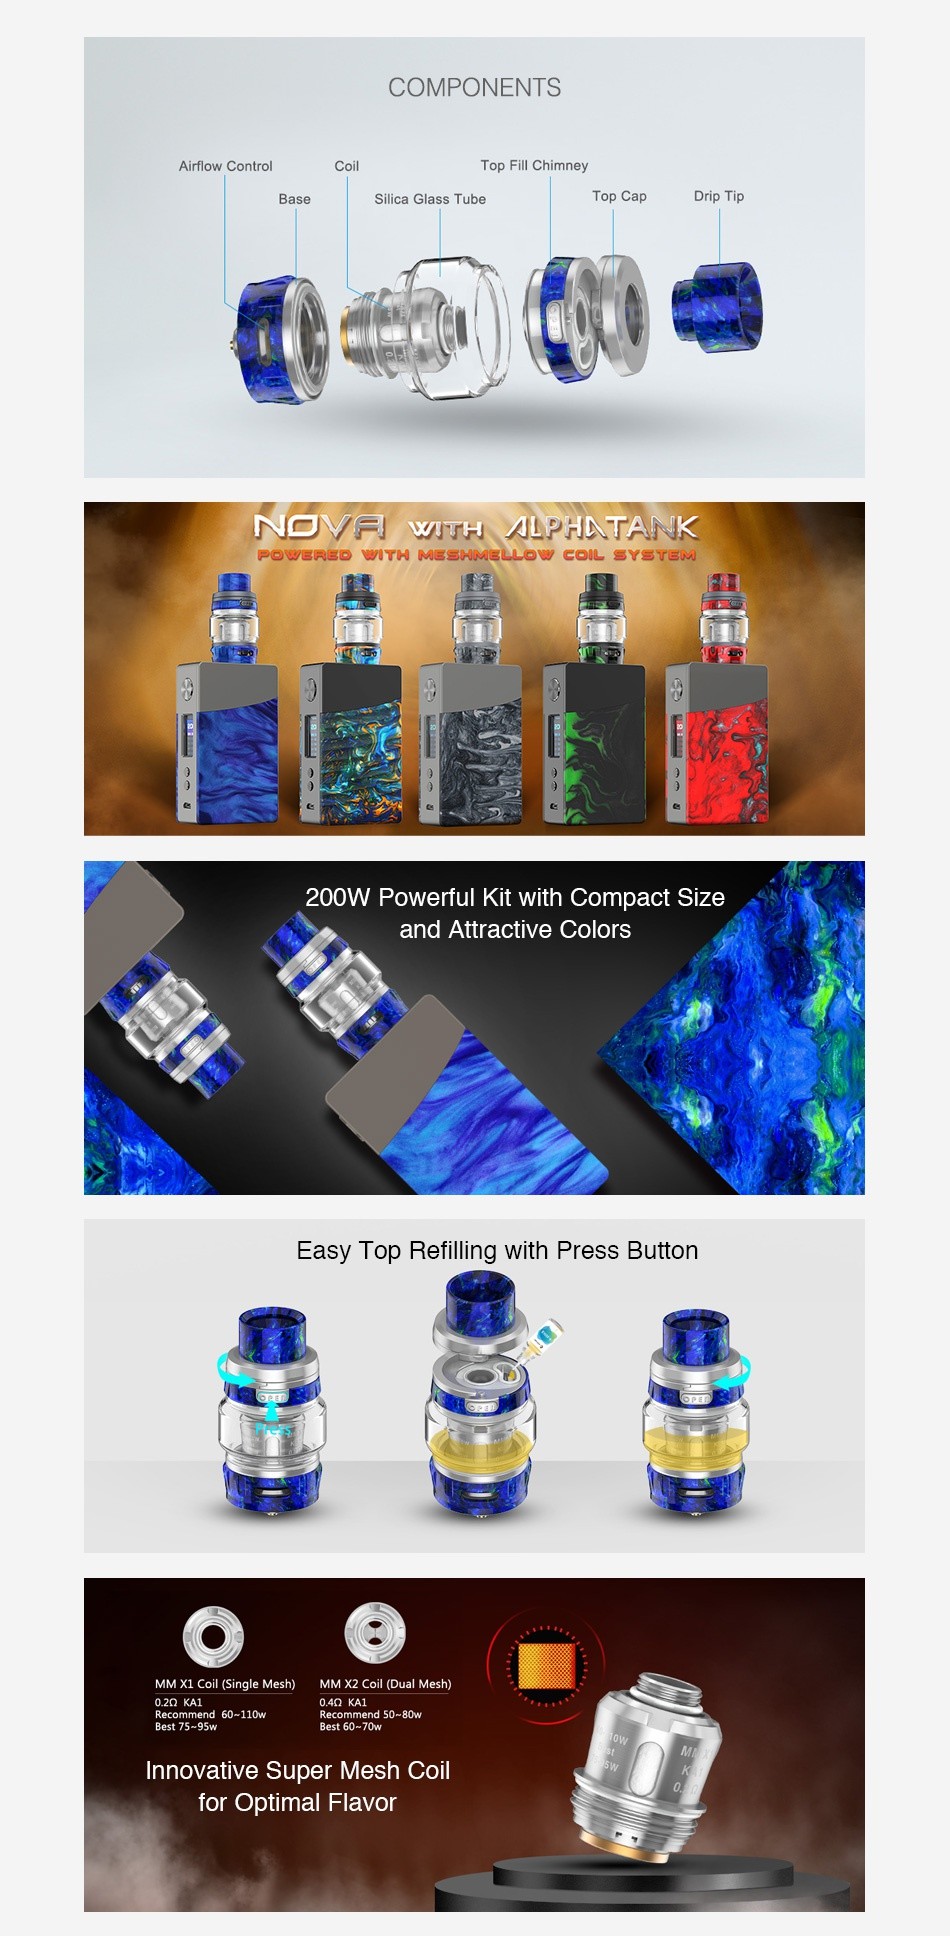 Geekvape NOVA 200W TC Kit with Alpha Tank COMPONENTS Airflow Control Top Fill Chimney Base Silica Glass Tube Top Cap Drip Tip N    HLPHNTANK P w   TH MESHMELLOW COIL sYsTEM 200W Powerful Kit with Compact size and attractive Colors Easy Top Refilling with Press Button MM Xl Coil  Single Mesh  MM X2 Coil  Dual Mesh  110w Best 75 95w Innovative Super Mesh coil for optimal flavor